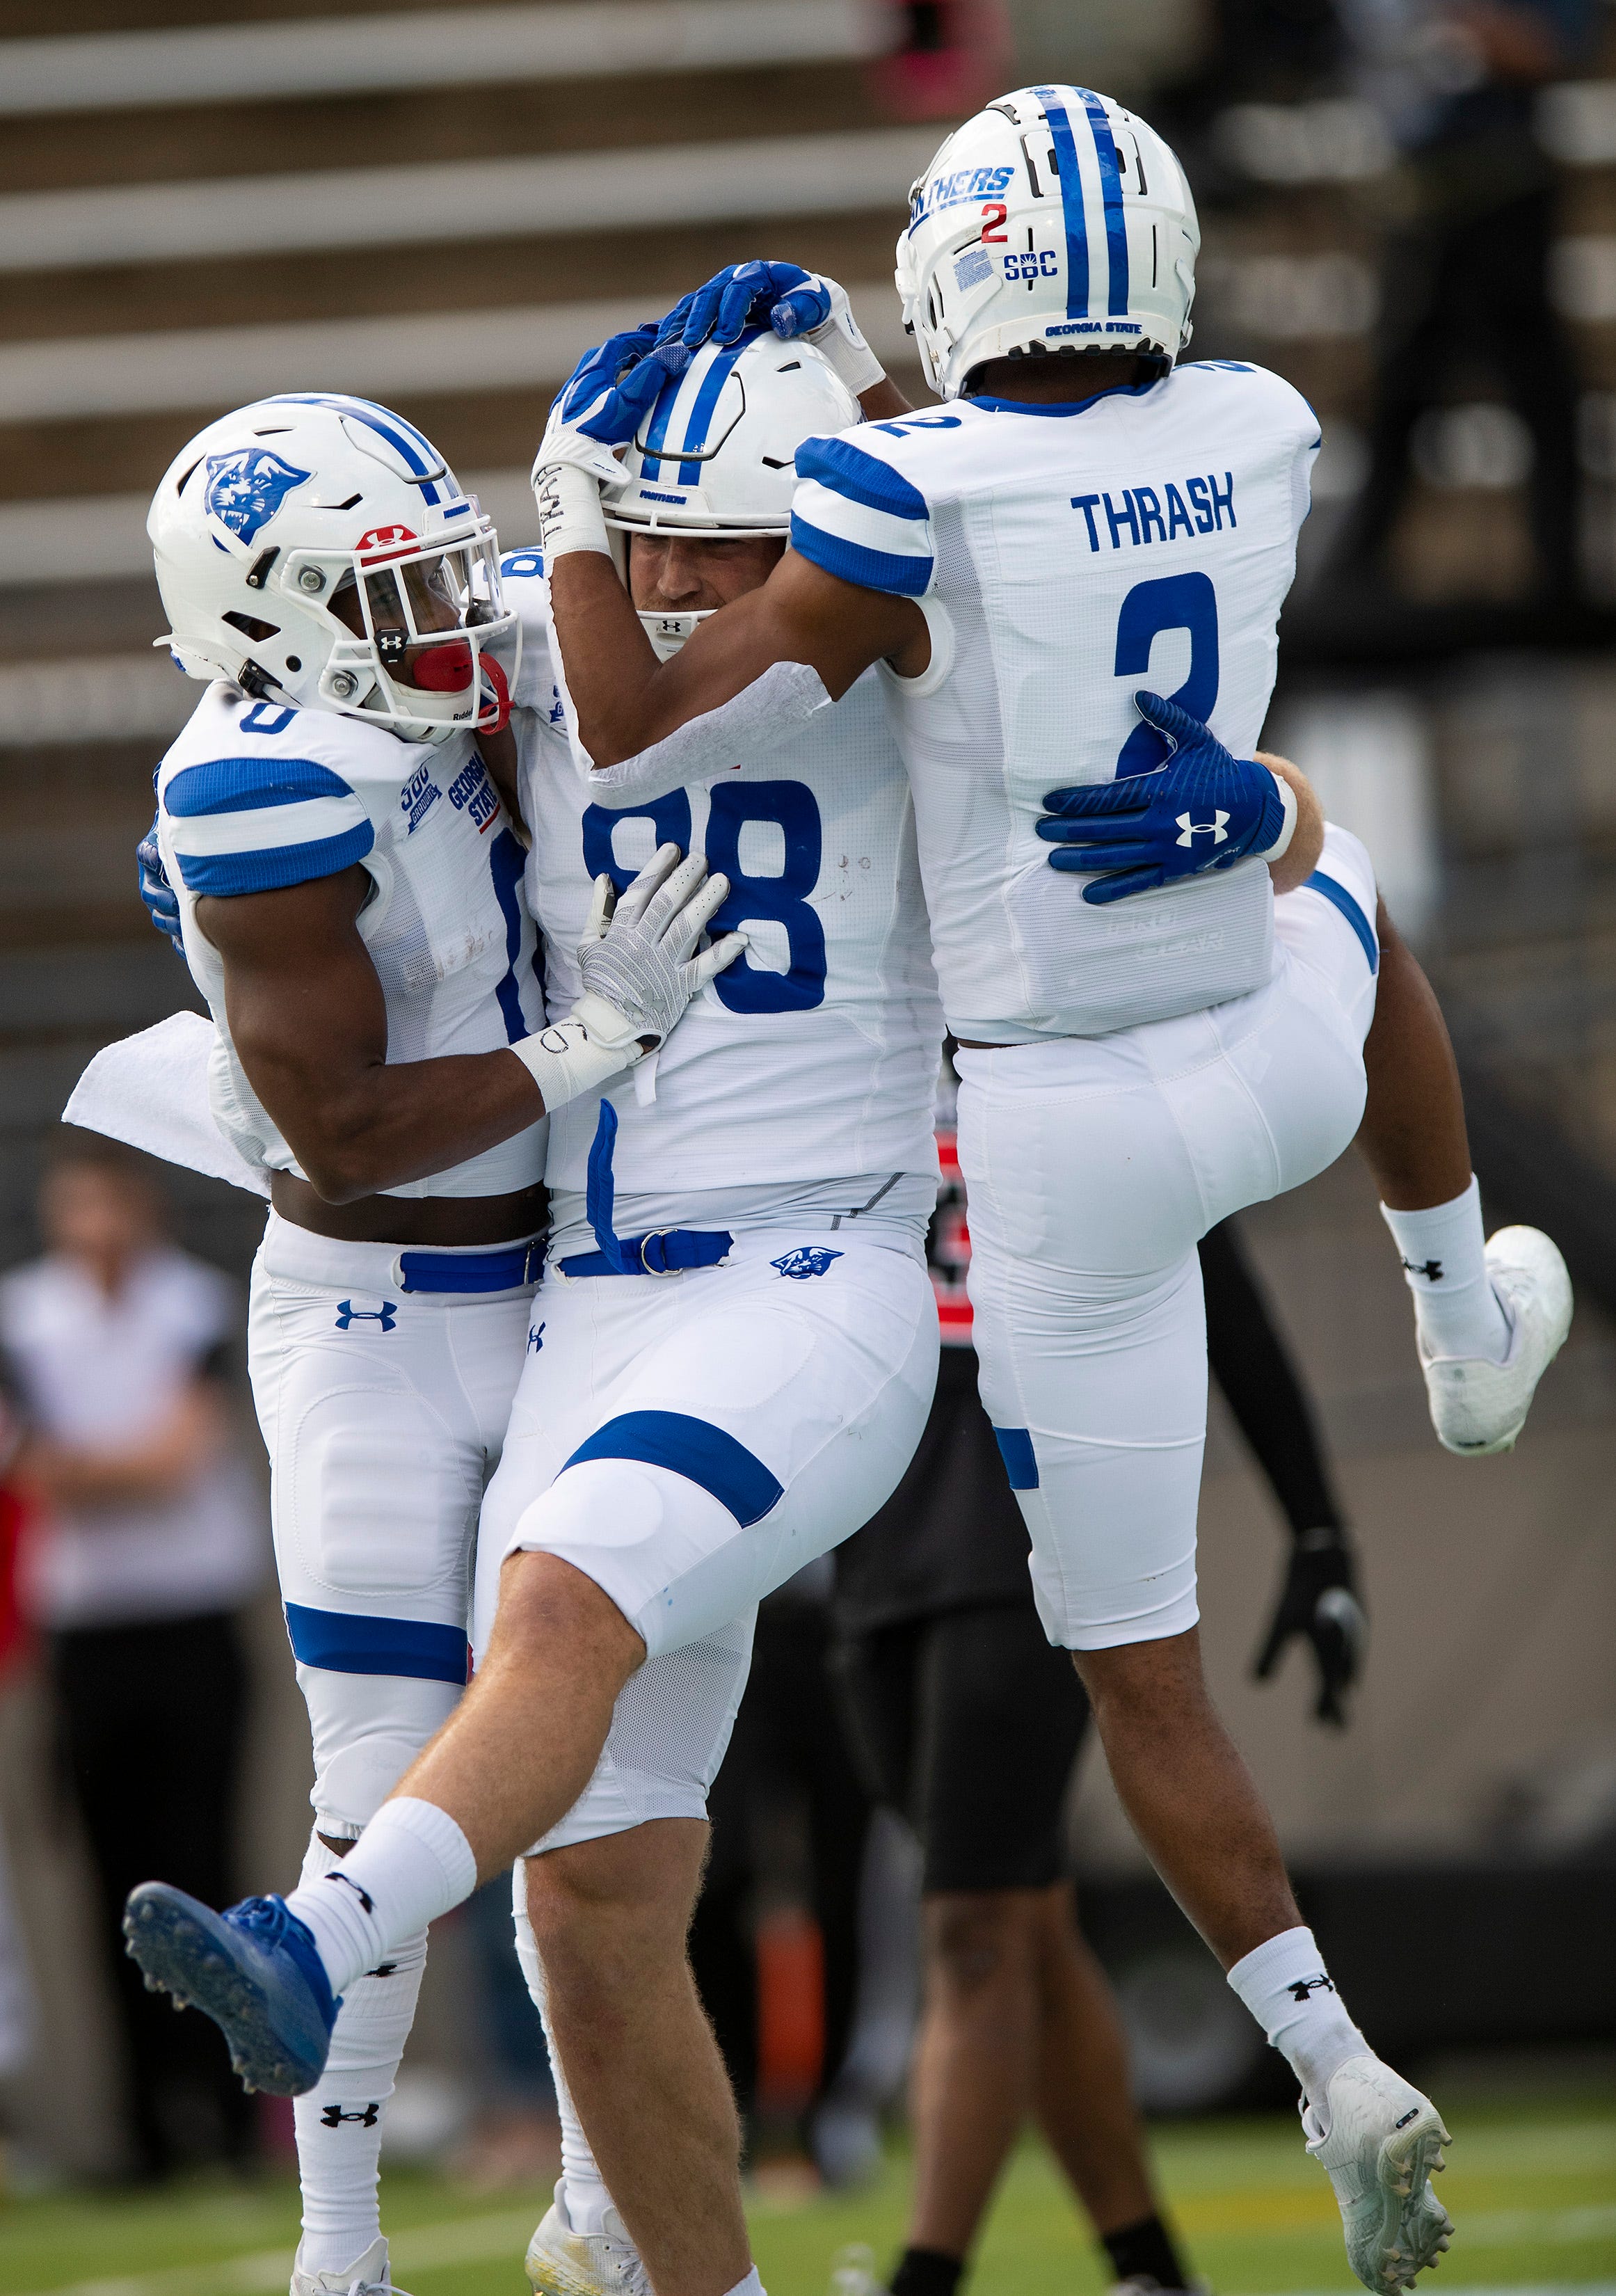 3 takeaways from Georgia State's 51-20 victory over Ball State in the Camellia Bowl